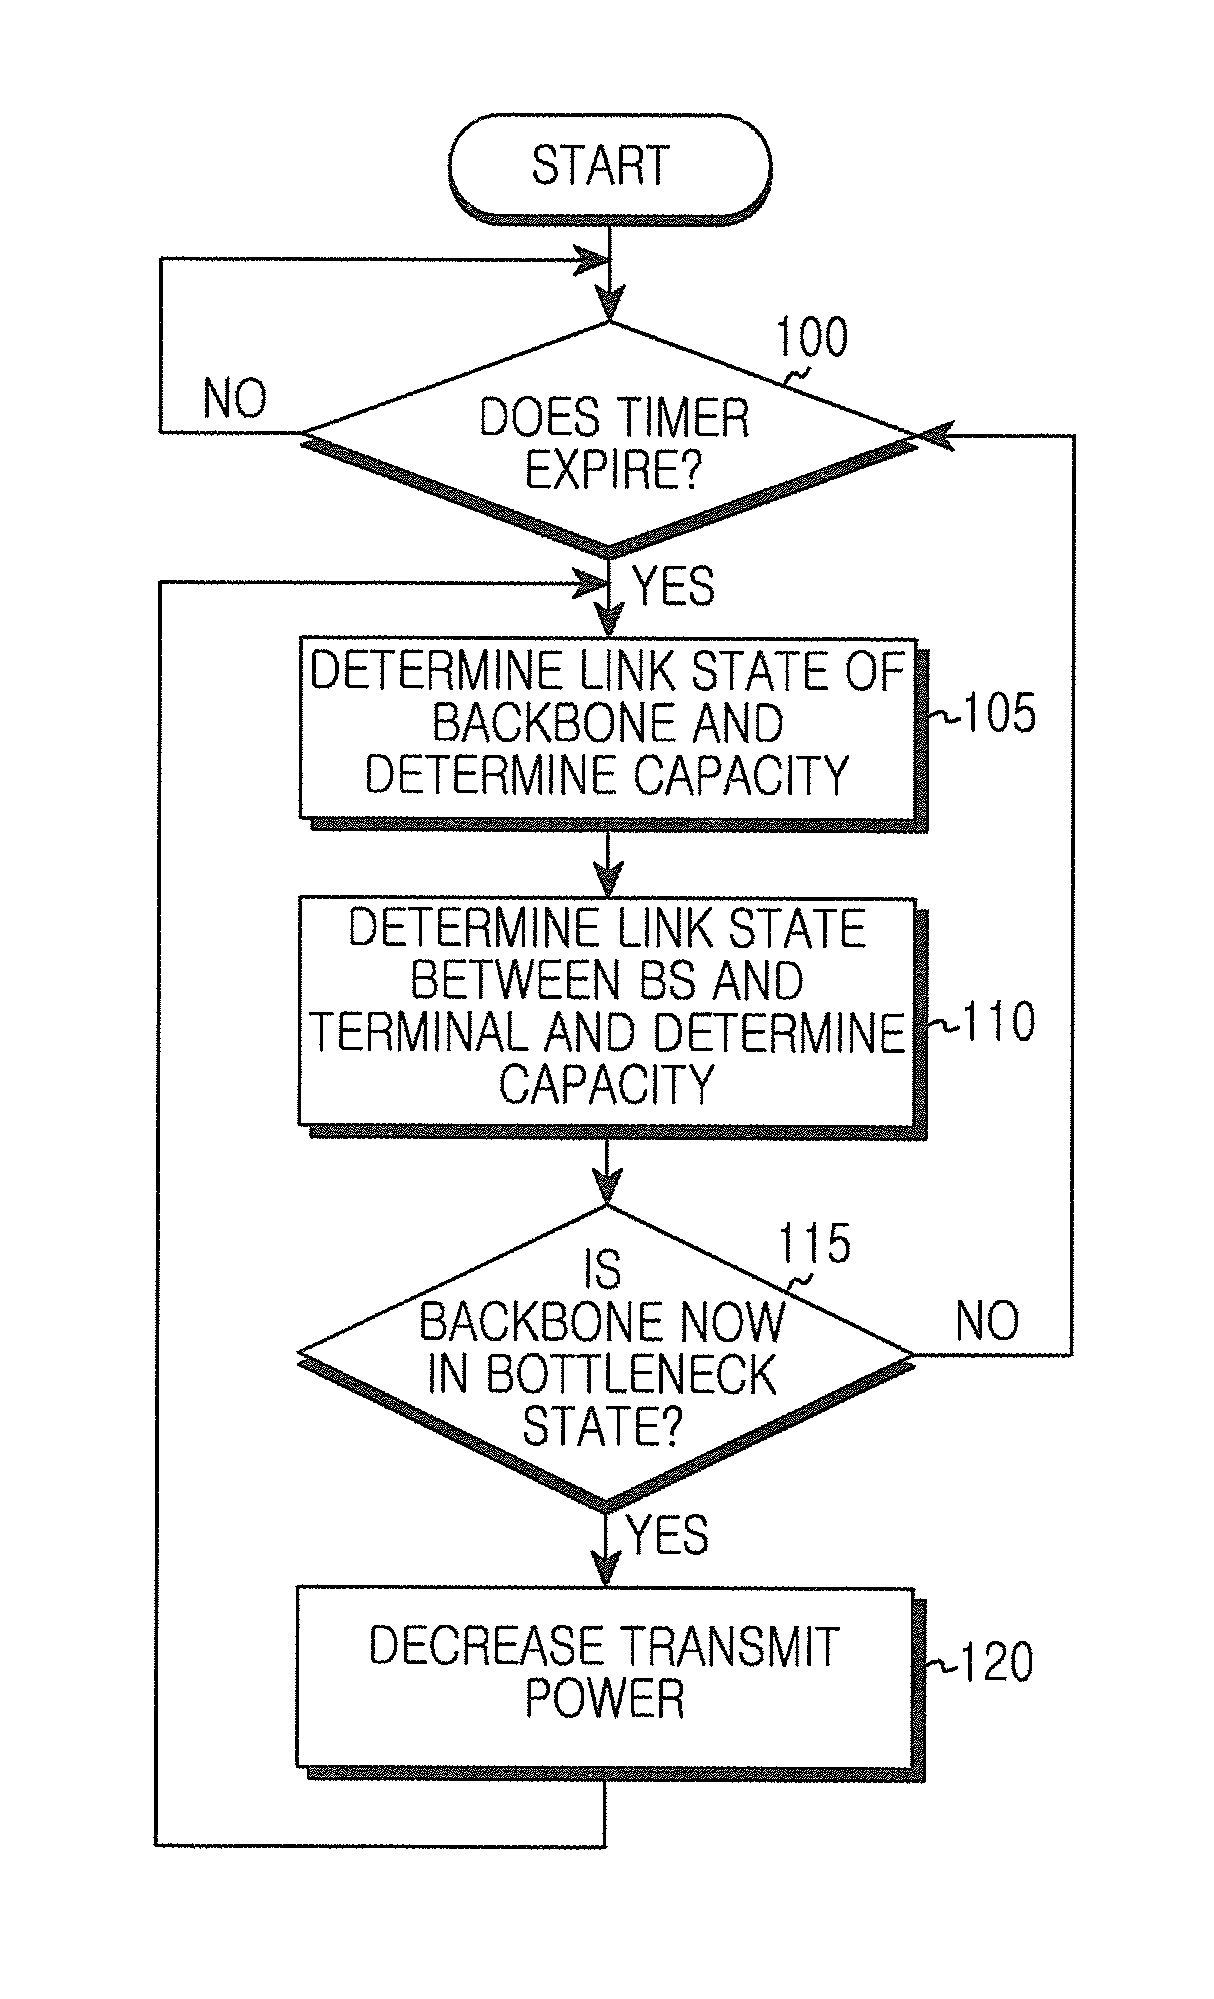 Apparatus and method for power control of mobile base station of variable backbone capacity